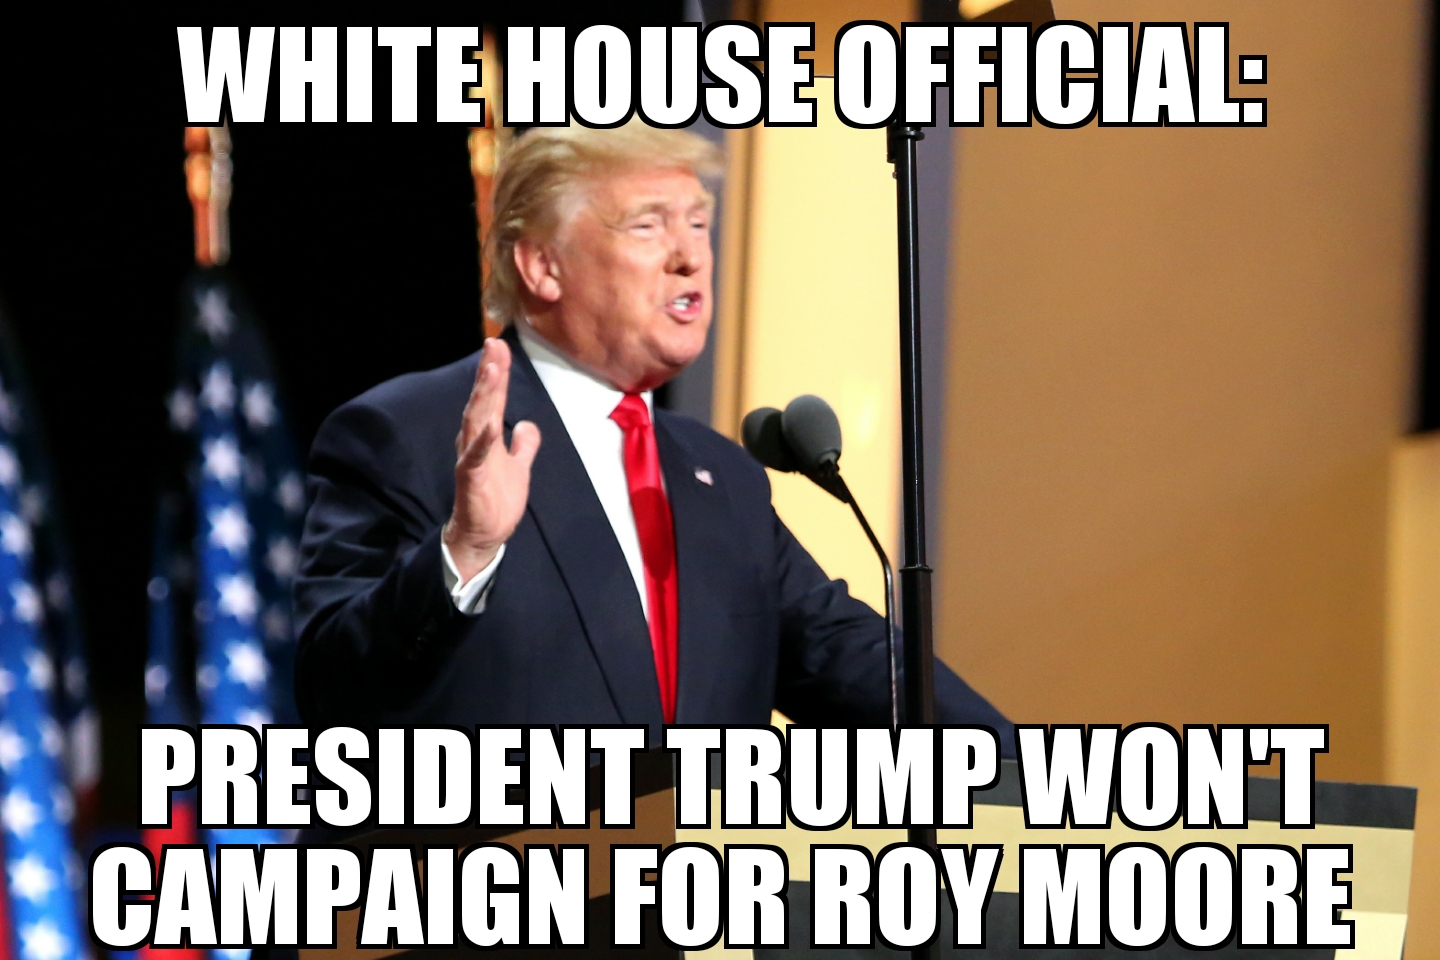 Trump won’t campaign for Roy Moore